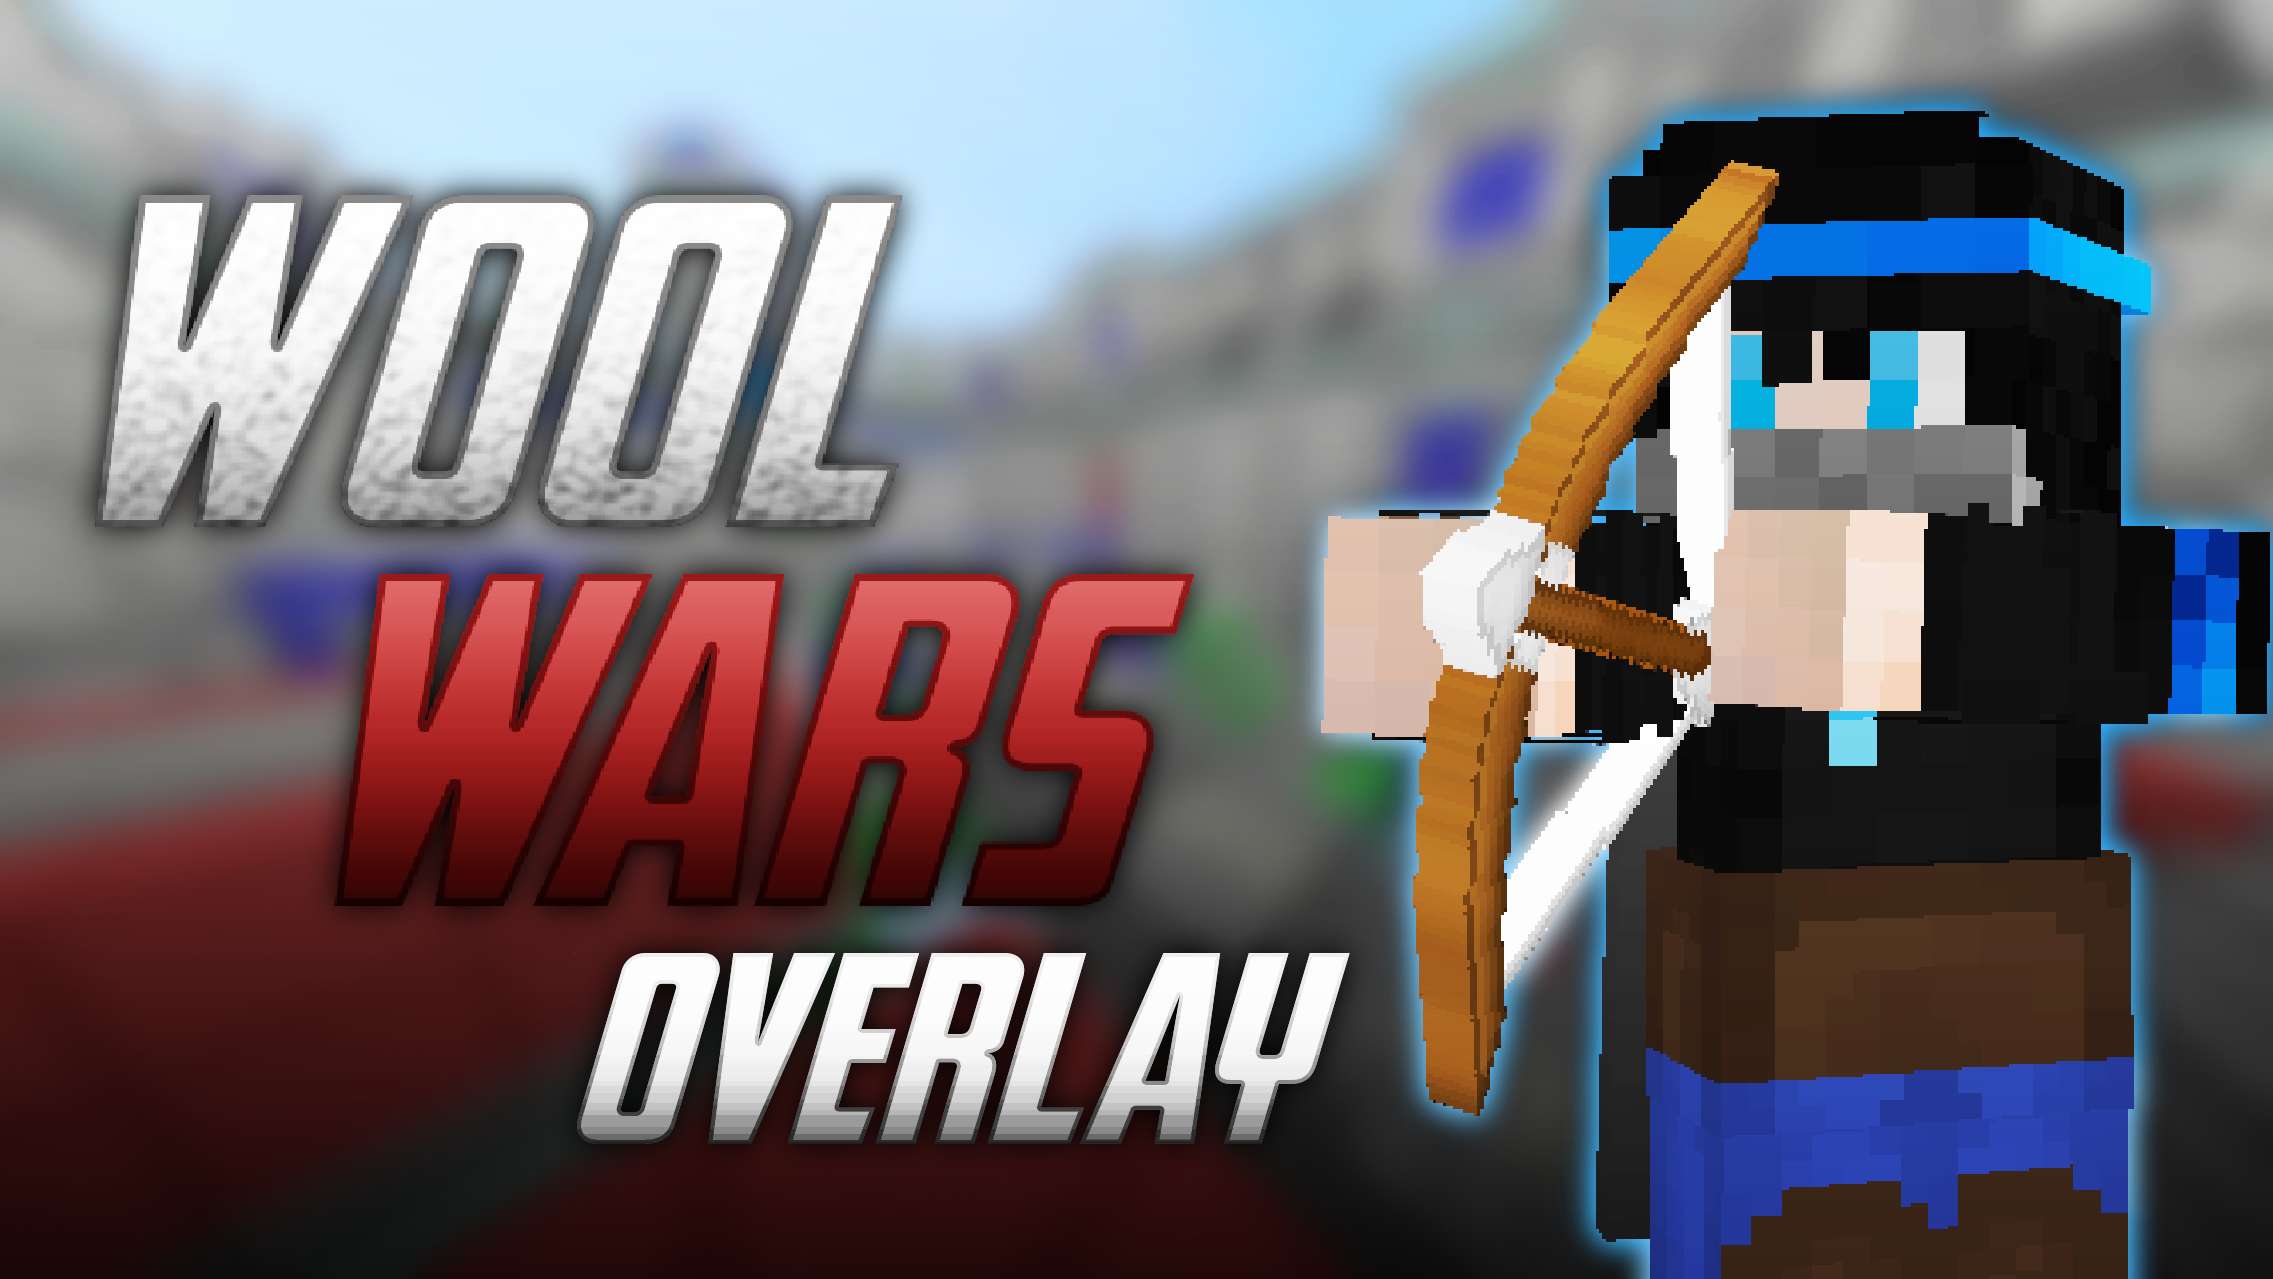 Gallery Banner for Wool Wars Overlay | Timepass 600 on PvPRP